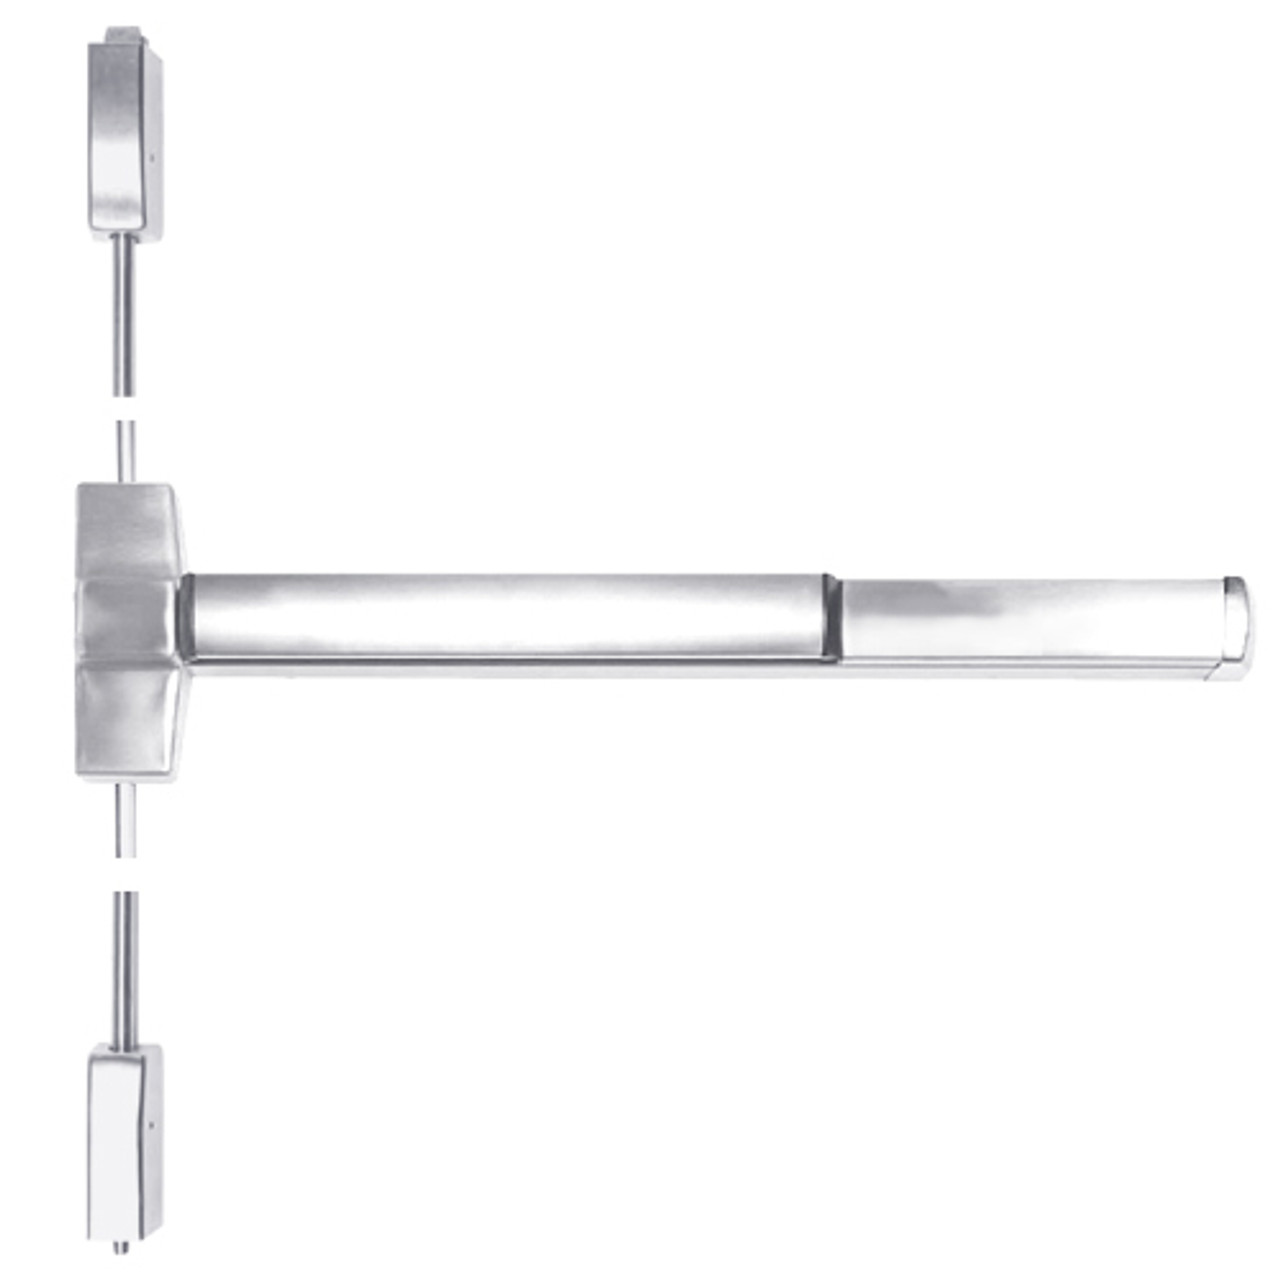 ED5470B-625-W048 Corbin ED5400 Series Fire Rated Vertical Rod Exit Device in Bright Chrome Finish